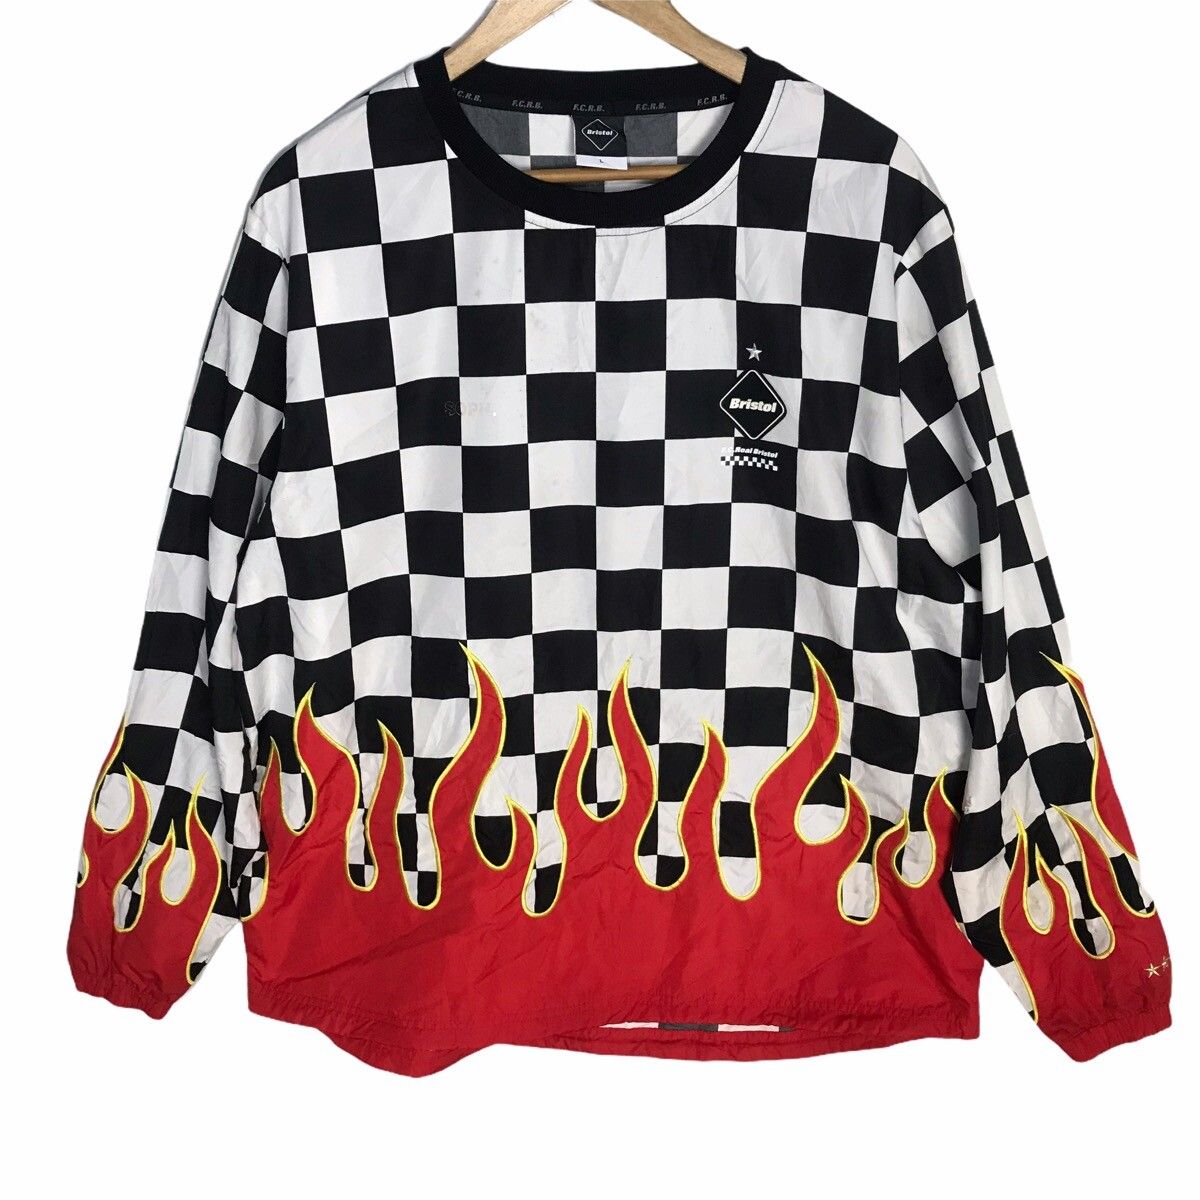 F.c real bristol checker flame piste large size - 1